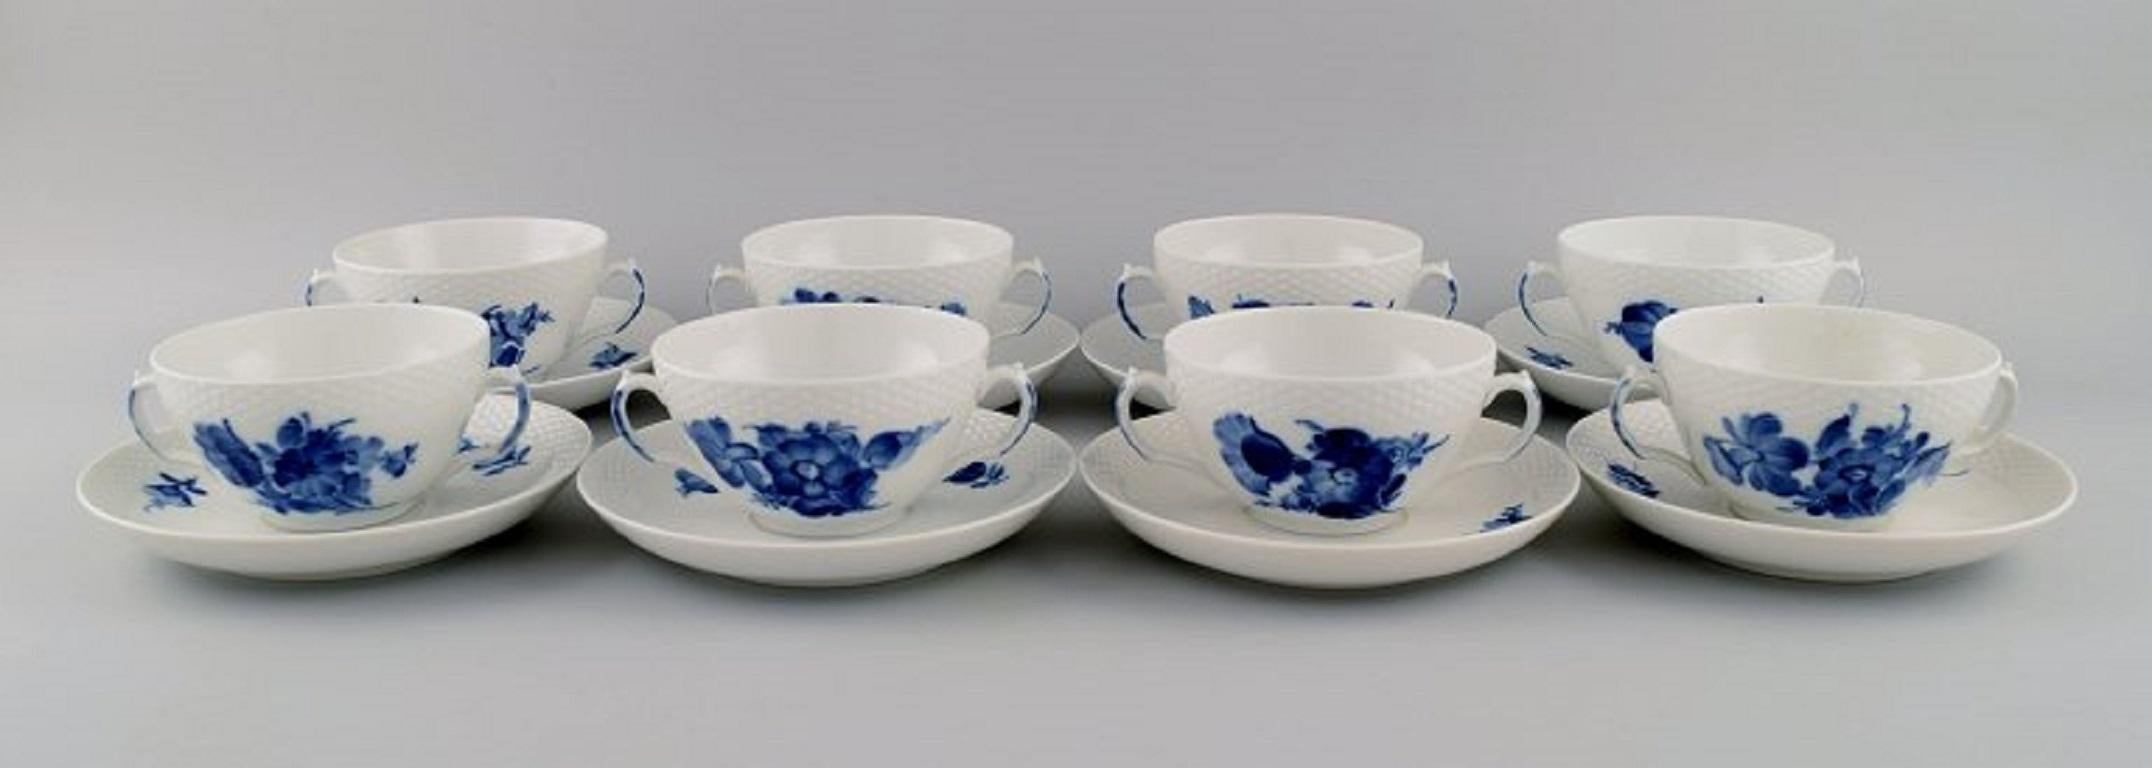 Eight Royal Copenhagen Blue Flower braided bouillon cups with saucers. Model number 10/8282.
The cup measures: 10.5 x 6 cm.
Saucer diameter: 16 cm.
In excellent condition.
Stamped.
1st factory quality.